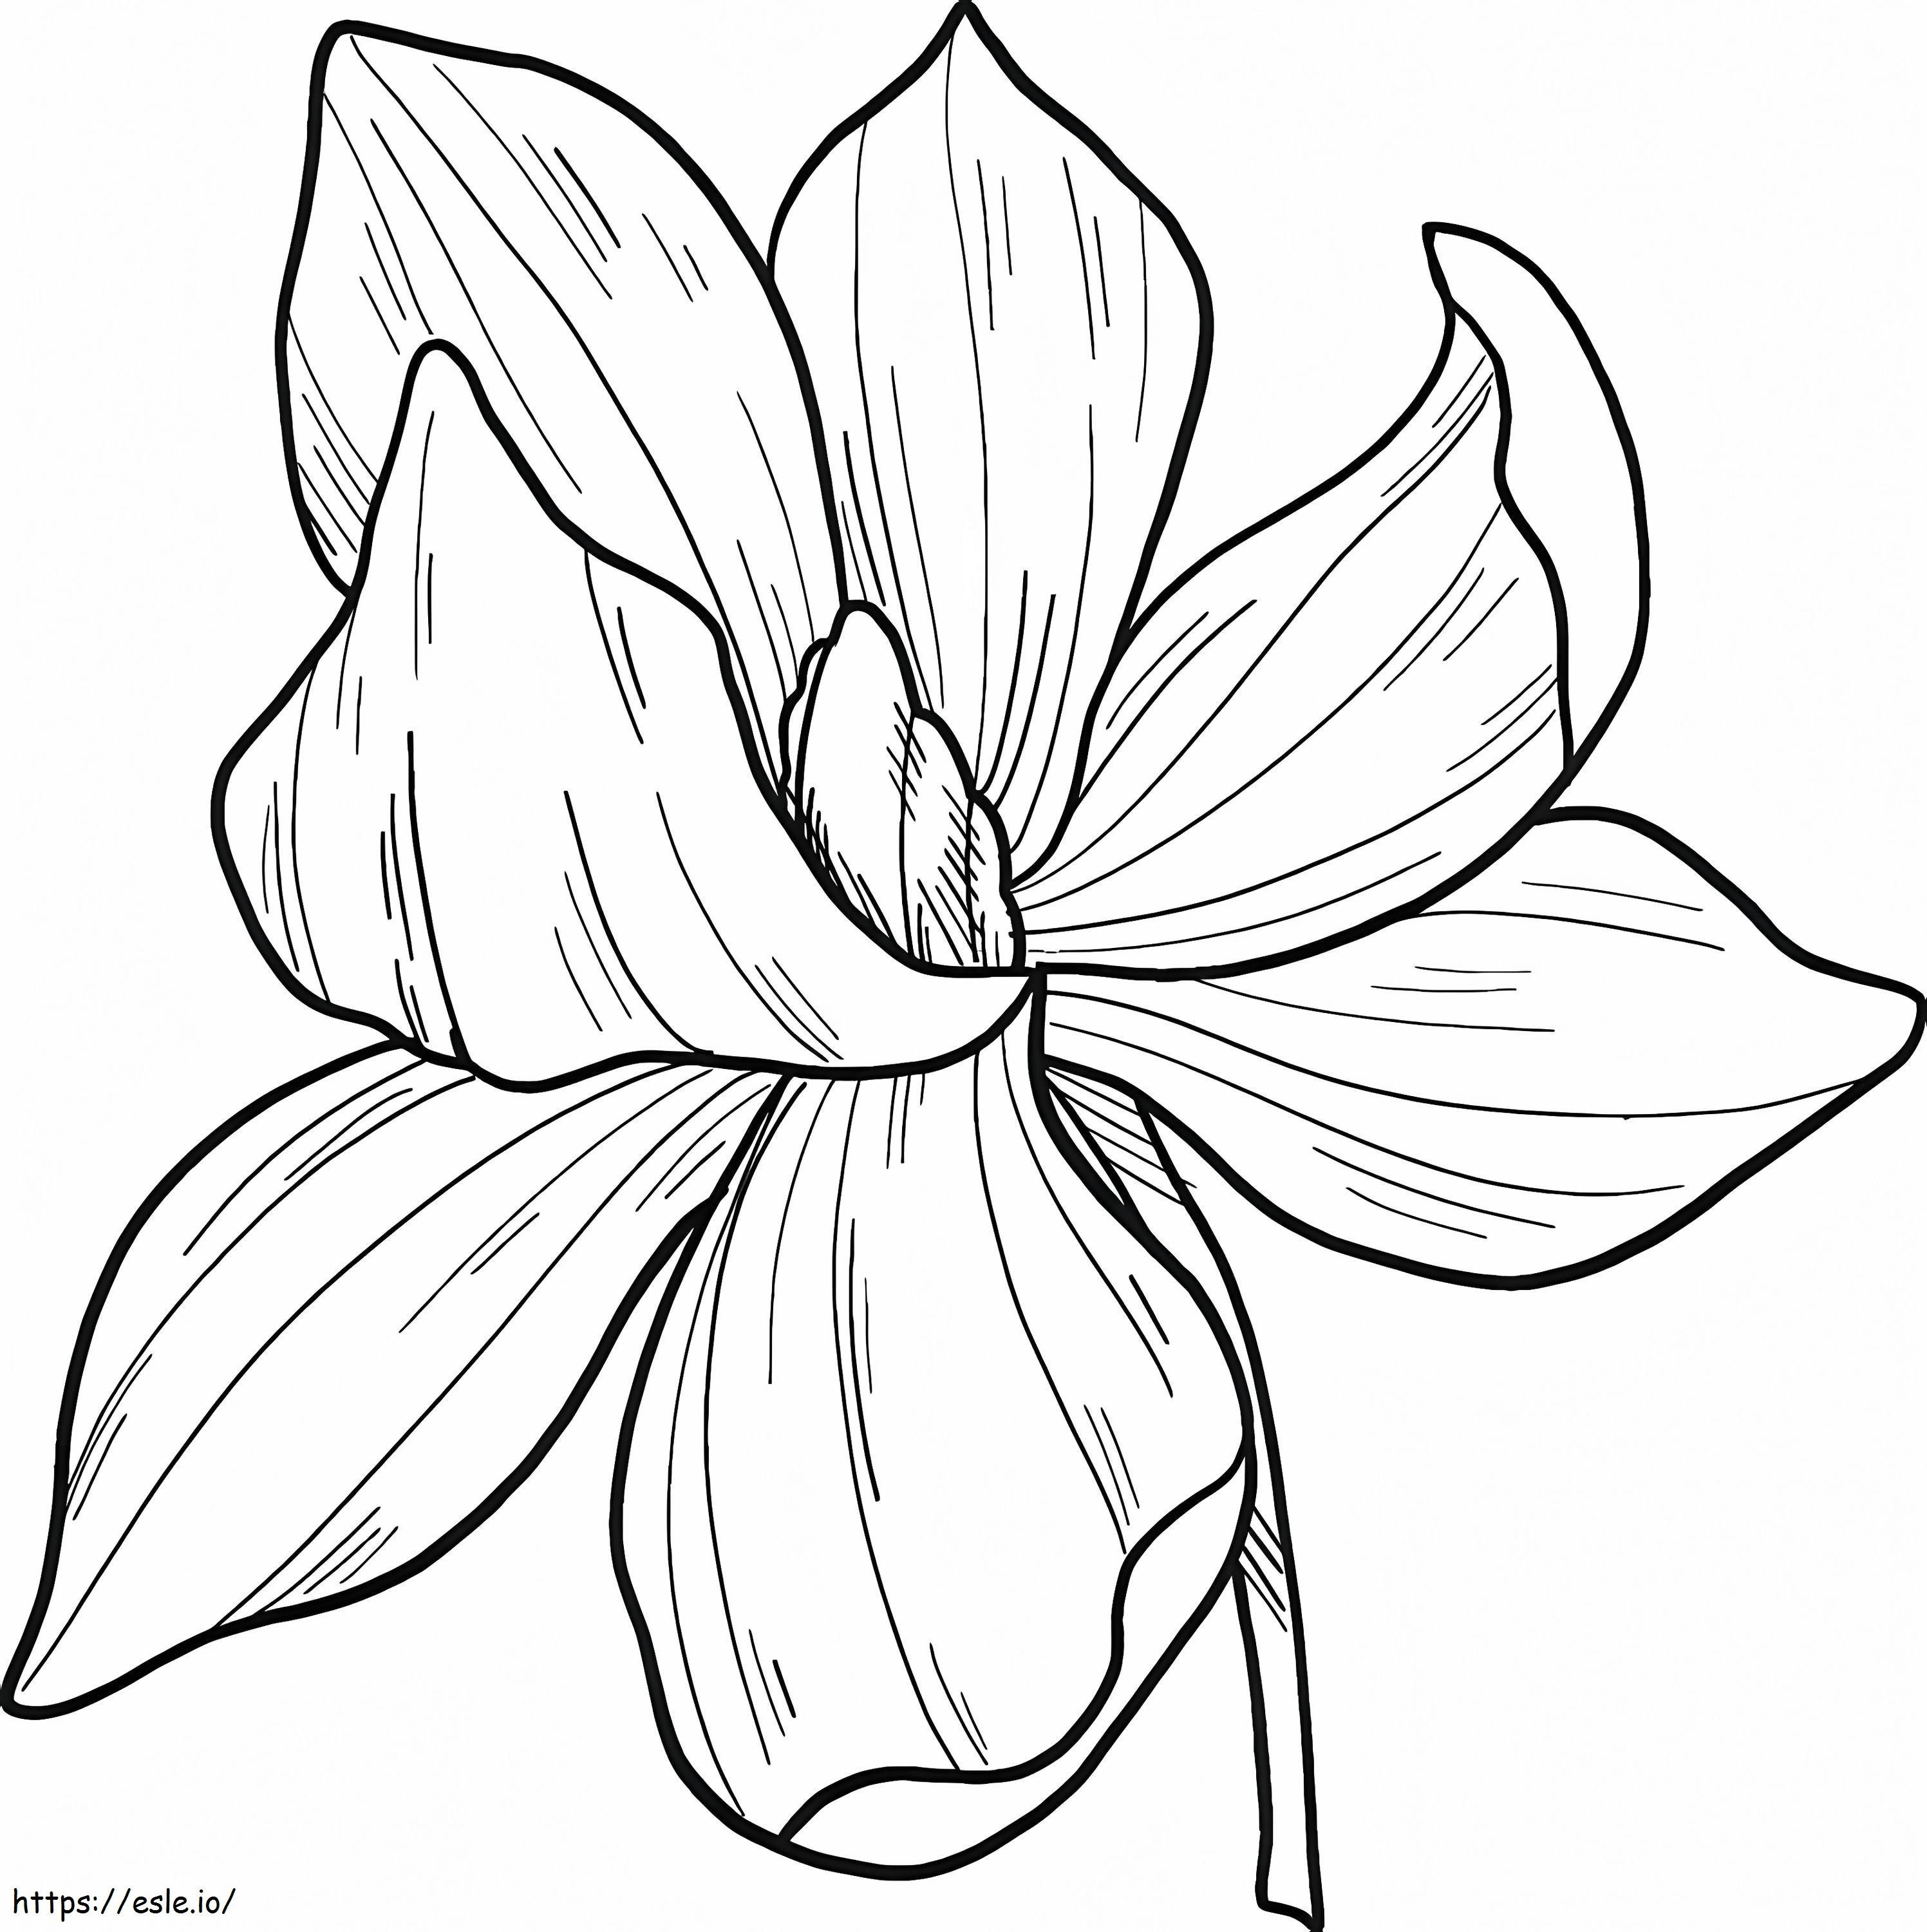 Magnolia Flower 10 coloring page